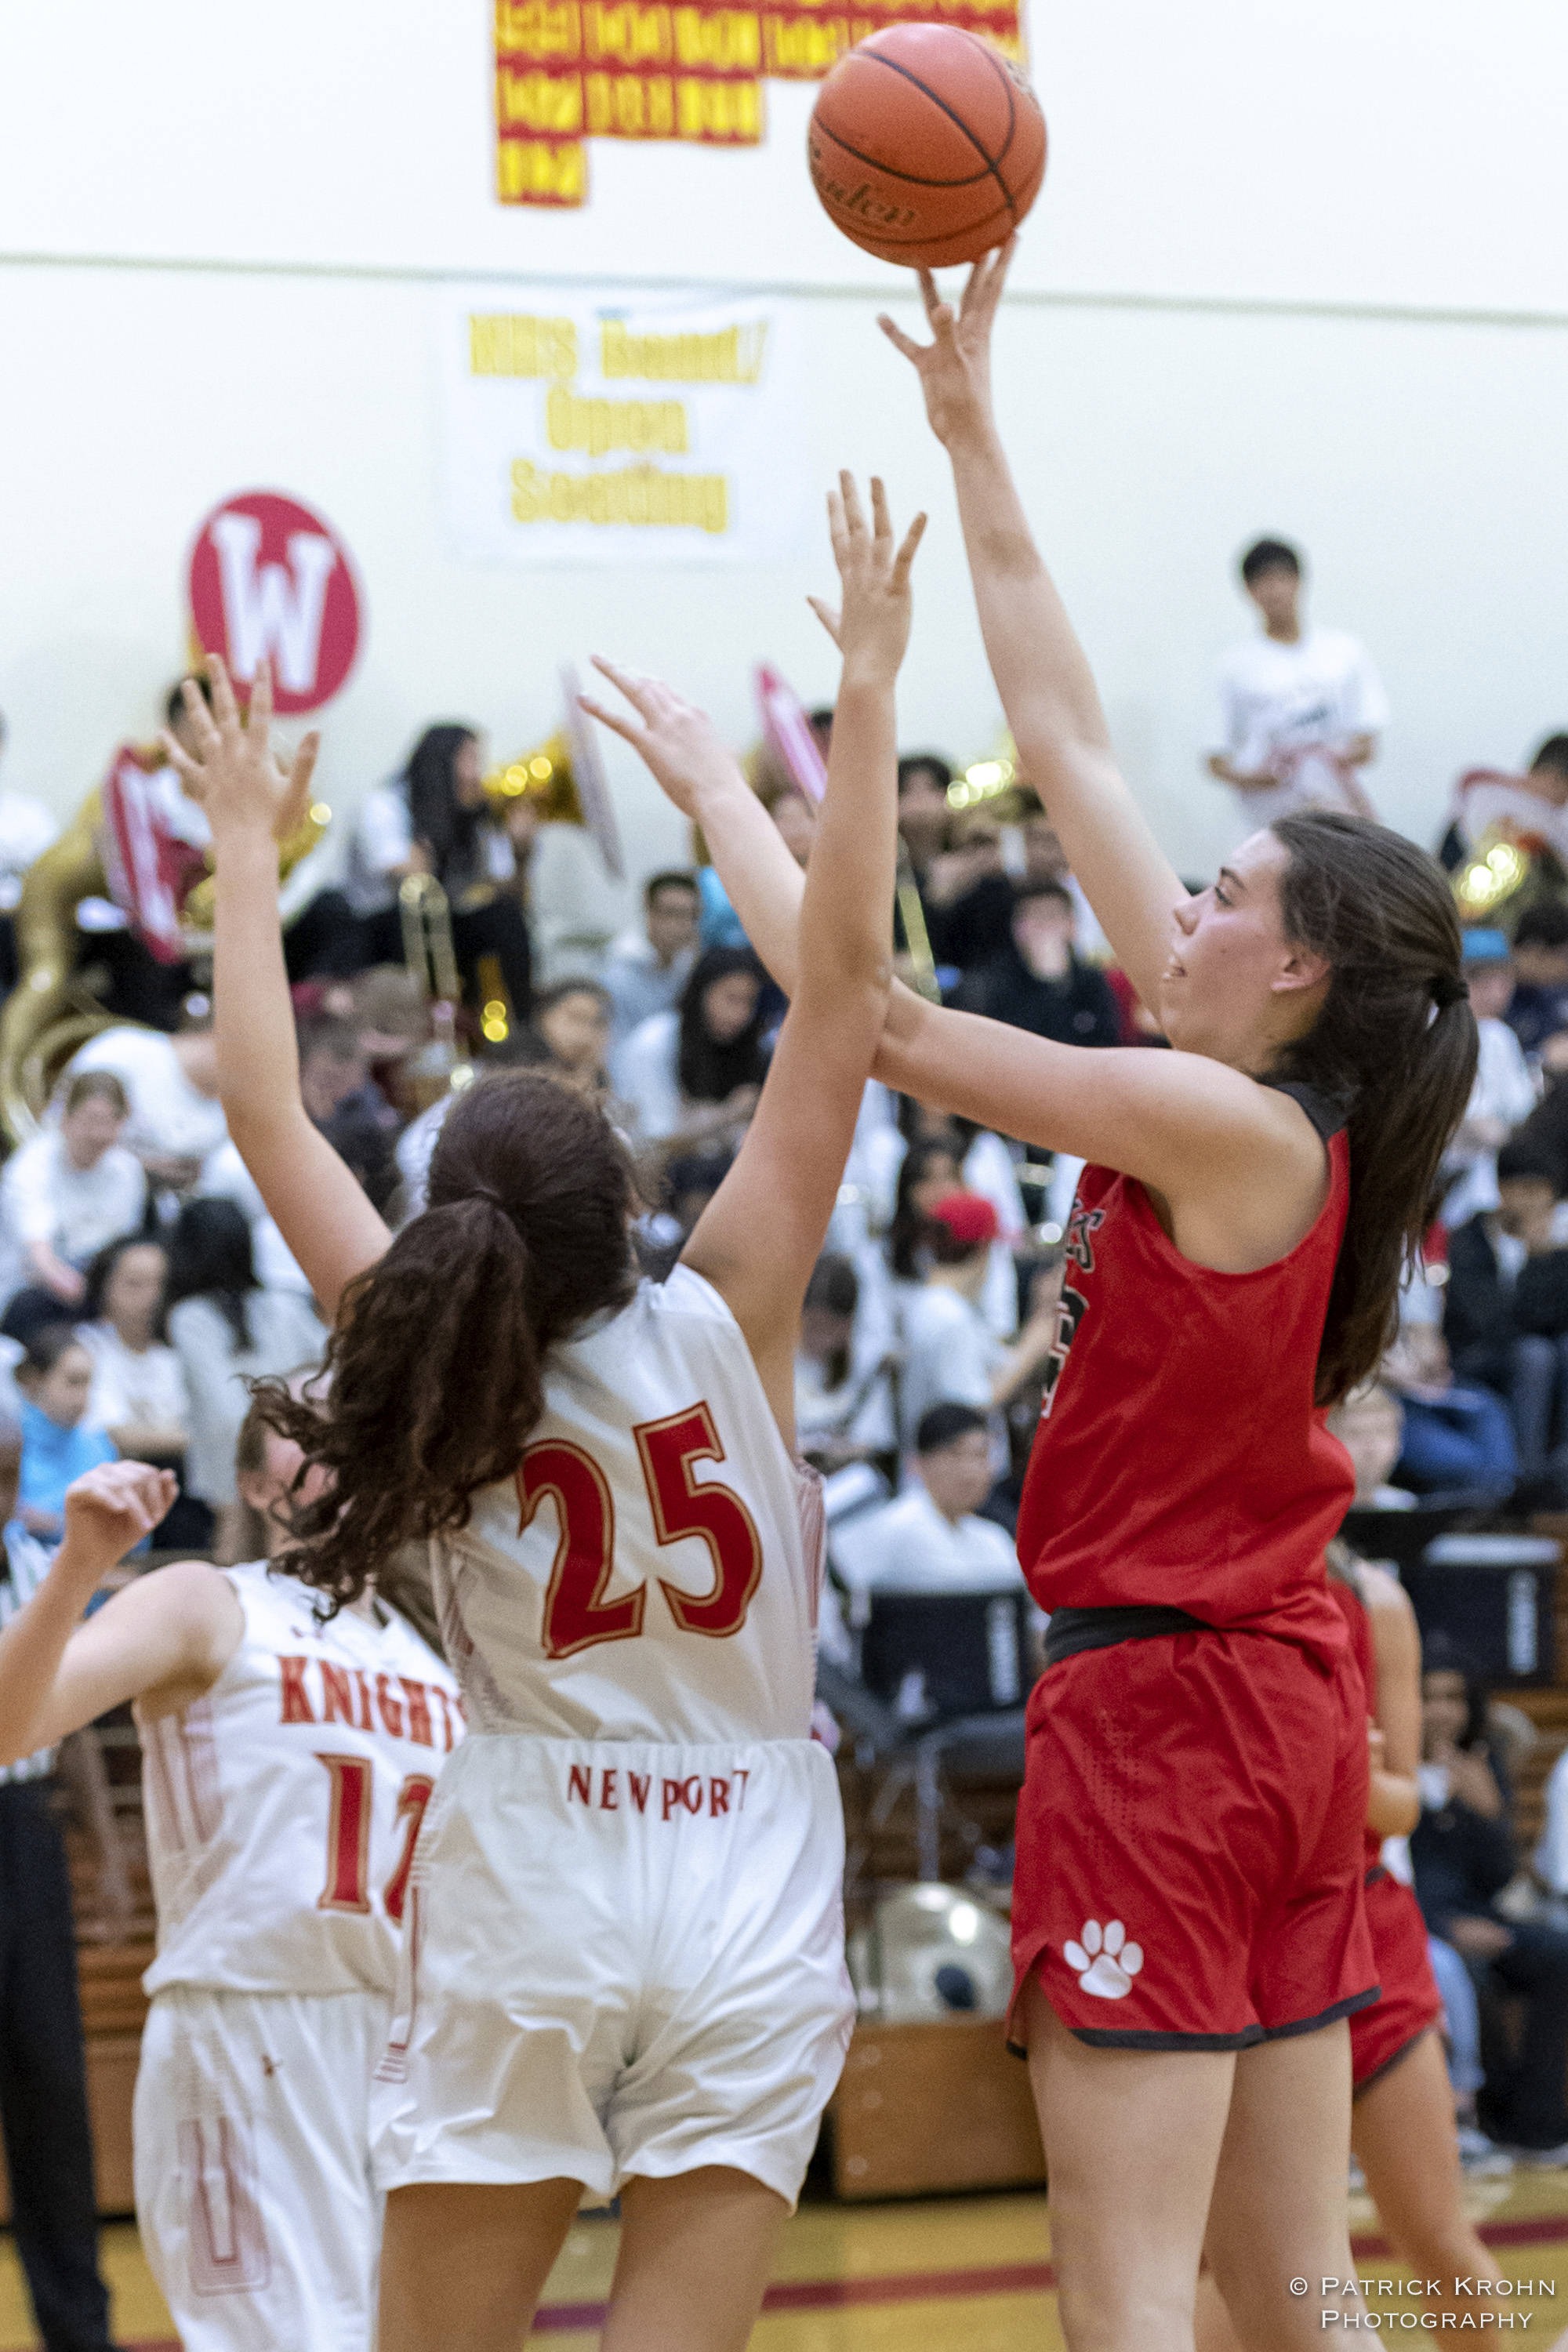 Mount Si Wildcats junior center Sela Heide, right, scored a team-high 15 points in a 4A KingCo contest against the Newport Knights on Dec. 14 in Factoria. Newport defeated Mount Si, 45-36. Photo courtesy of Patrick Krohn/Patrick Krohn Photography